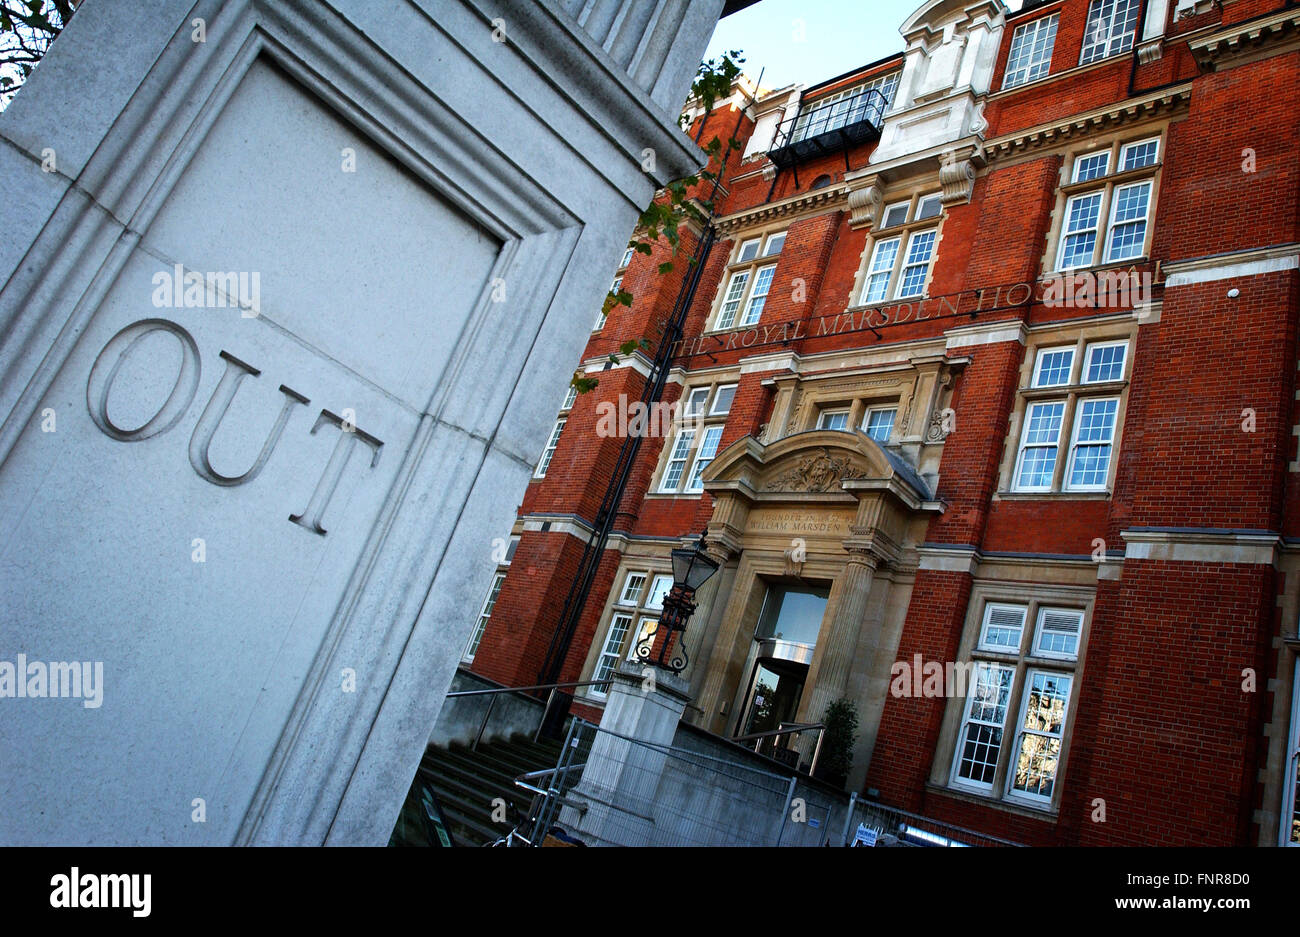 Gated entrance to the The Royal Marsden Hospital, London.   Royal Marsden Hospital is a specialist cancer treatment hospital in Stock Photo